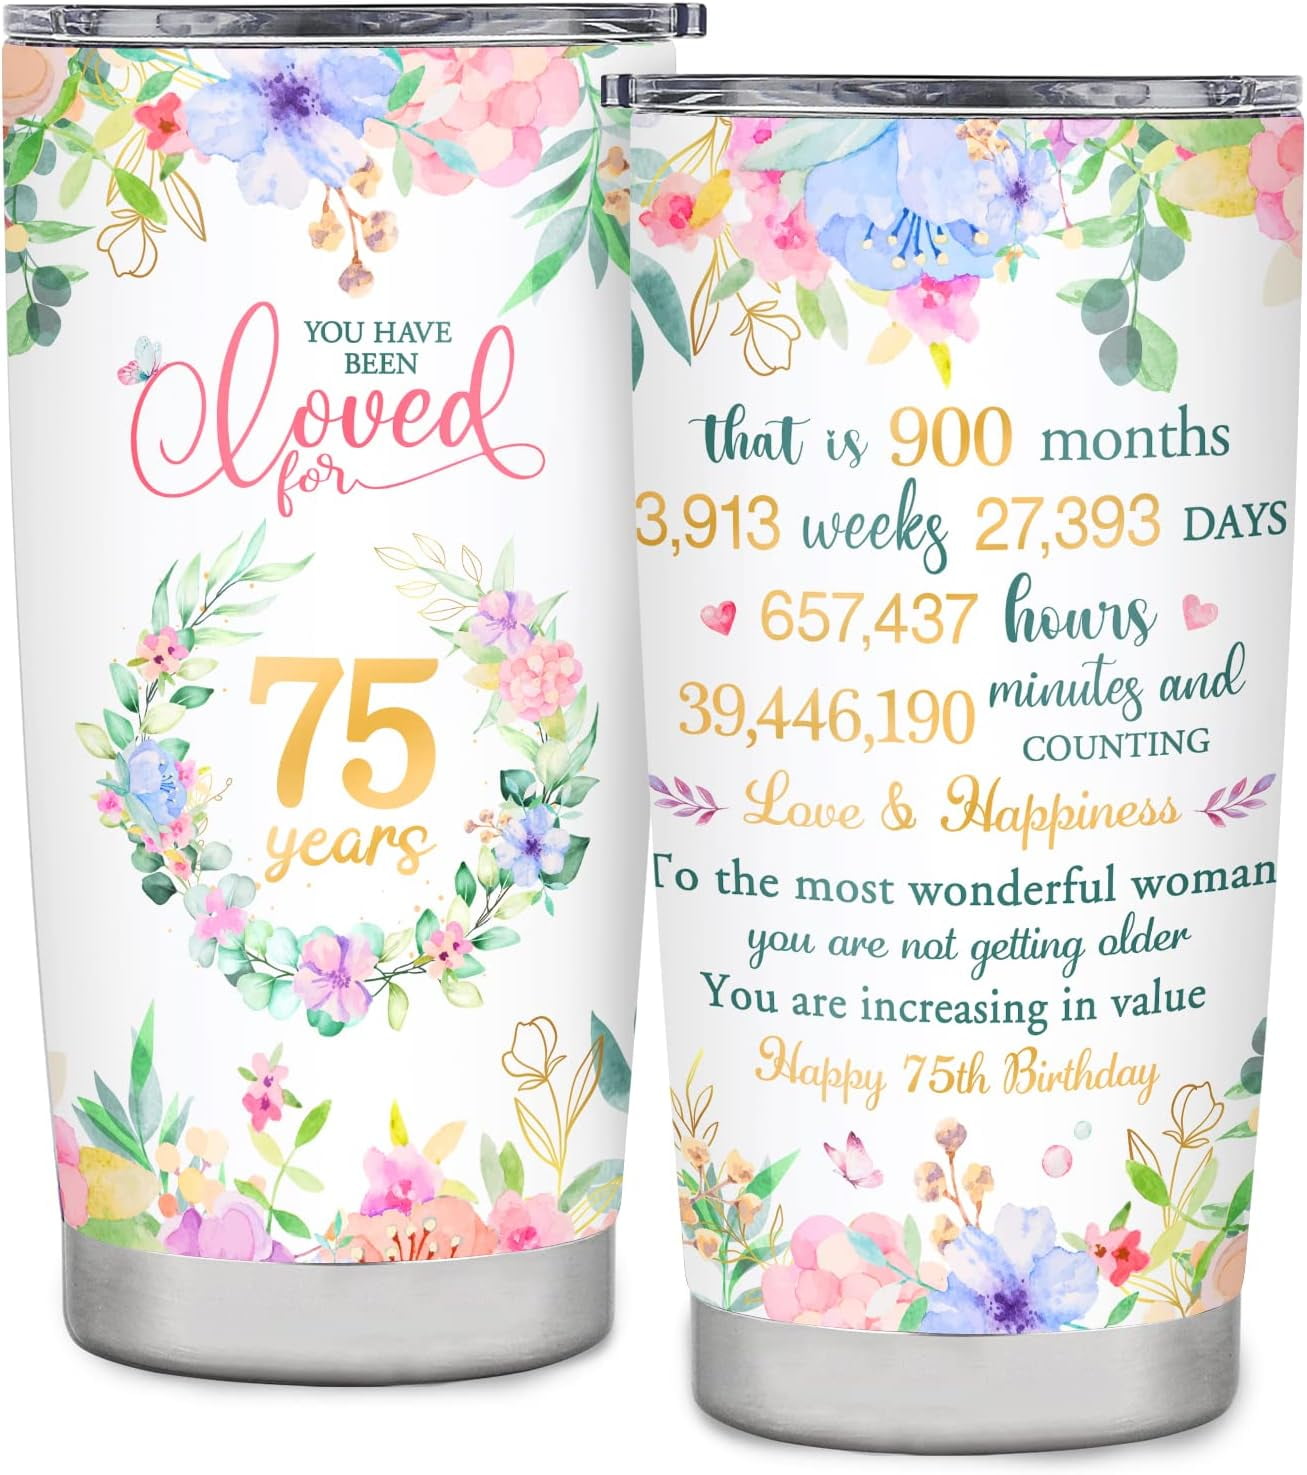 70th Birthday Gifts for Women, 70th Birthday Tumbler Gift Ideas, Happy 70 Year Old Birthday Gift for Mom Grandma Sister, 1953 Birthday Gifts, 70th